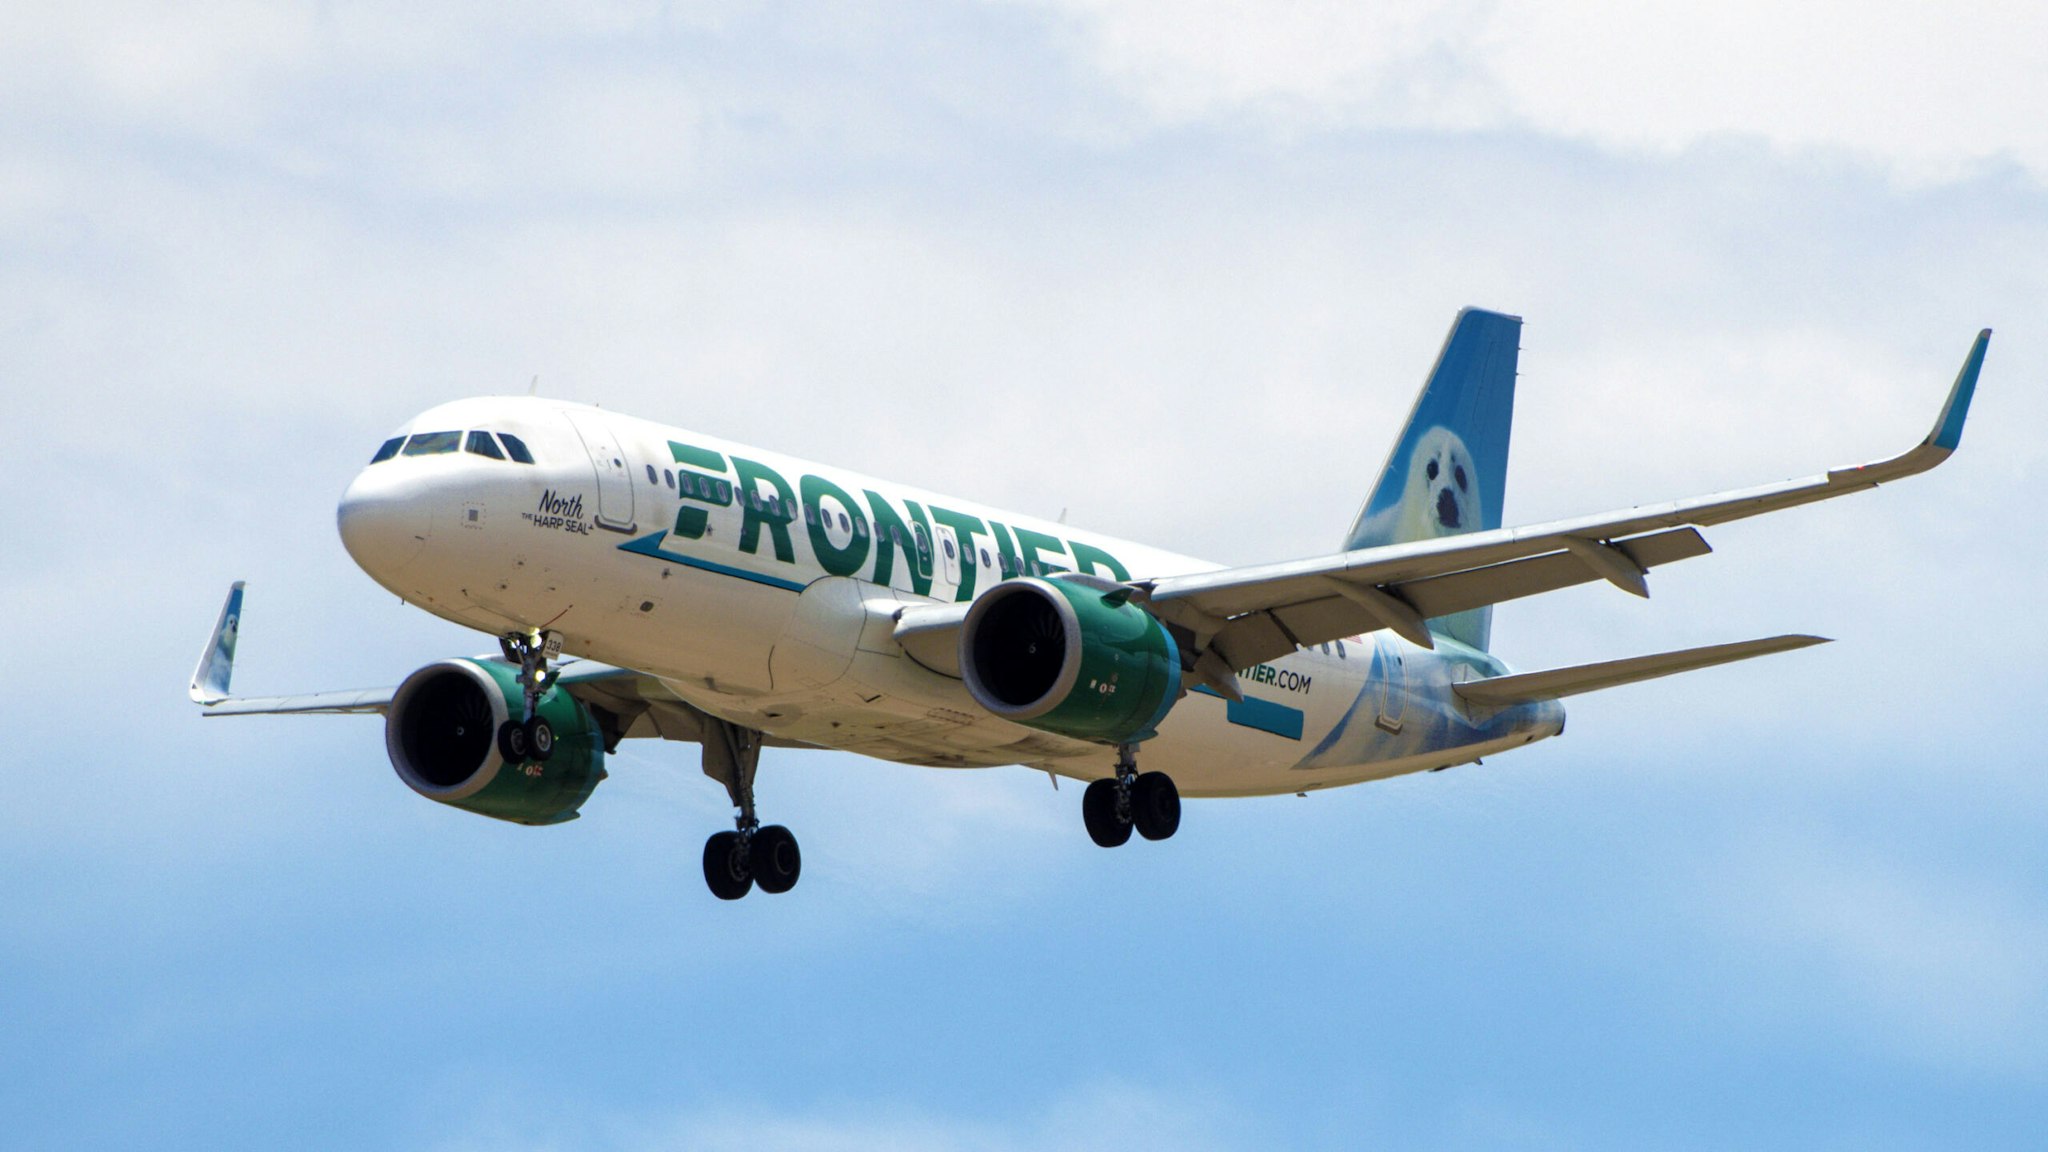 A Frontier Airlines flight prepares to land at Denver International Airport in Denver, Colorado, US, on Wednesday, June 29, 2022. Spirit Airlines Inc. stood by a takeover bid from Frontier Group Holdings Inc. even after rival suitor JetBlue Airways Corp. further sweetened its offer in the final days before a crucial shareholder vote. Photographer